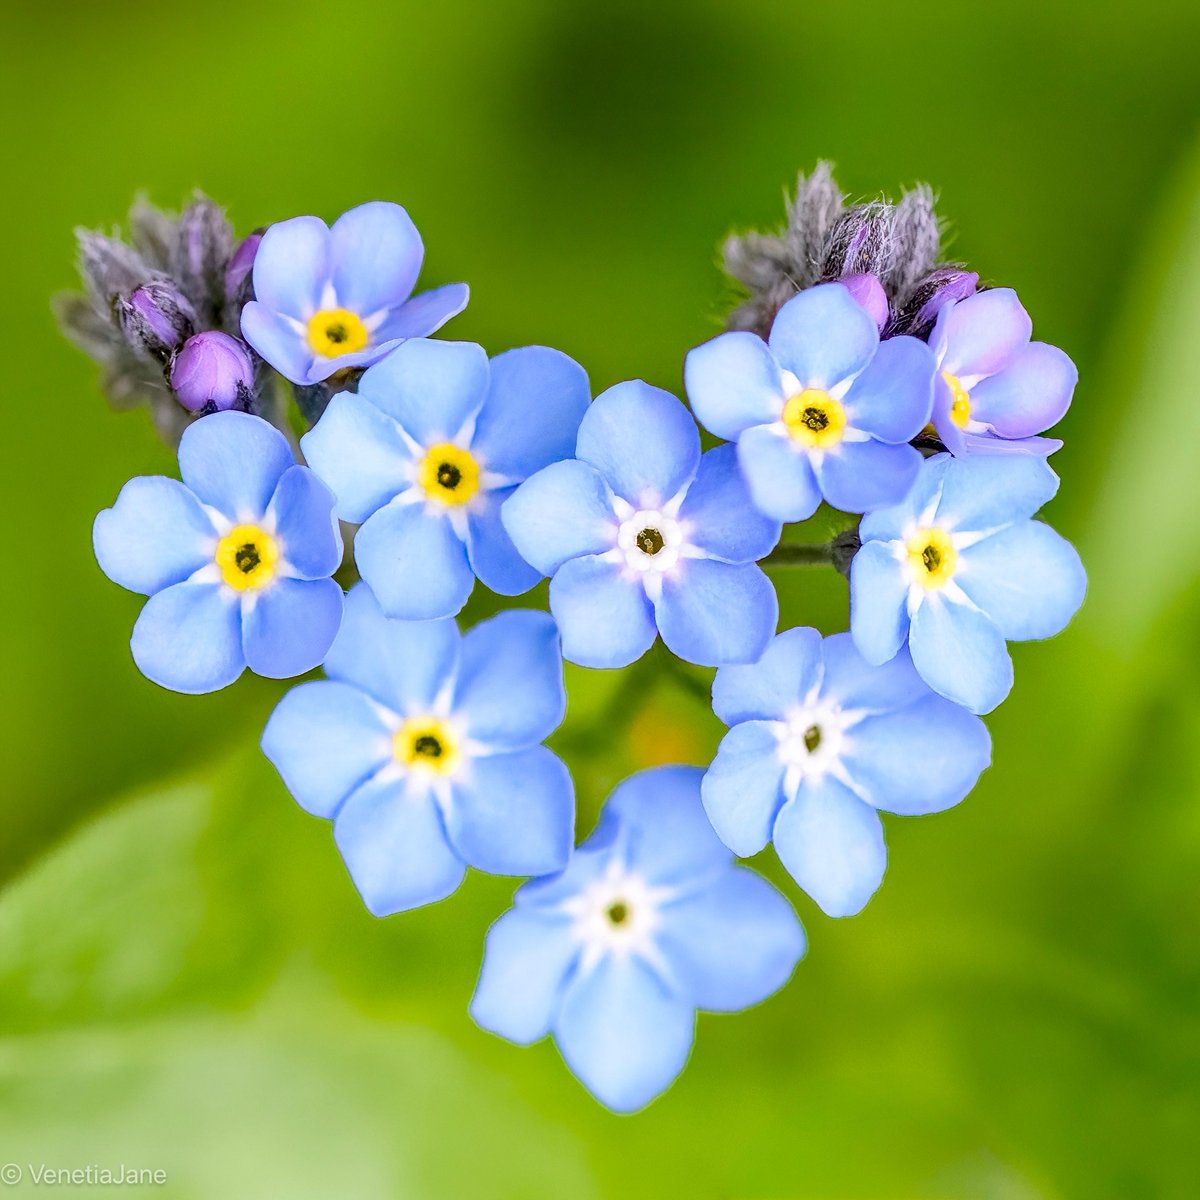 Legend tells that a piece of sky falling to earth caught a spark from a star as it passed. From the place in the grass where the sky landed a tiny blue flower grew, the star's spark shining brightly at its centre. The star whispered to it 'forget-me-not' #FolkloreThursday #nature